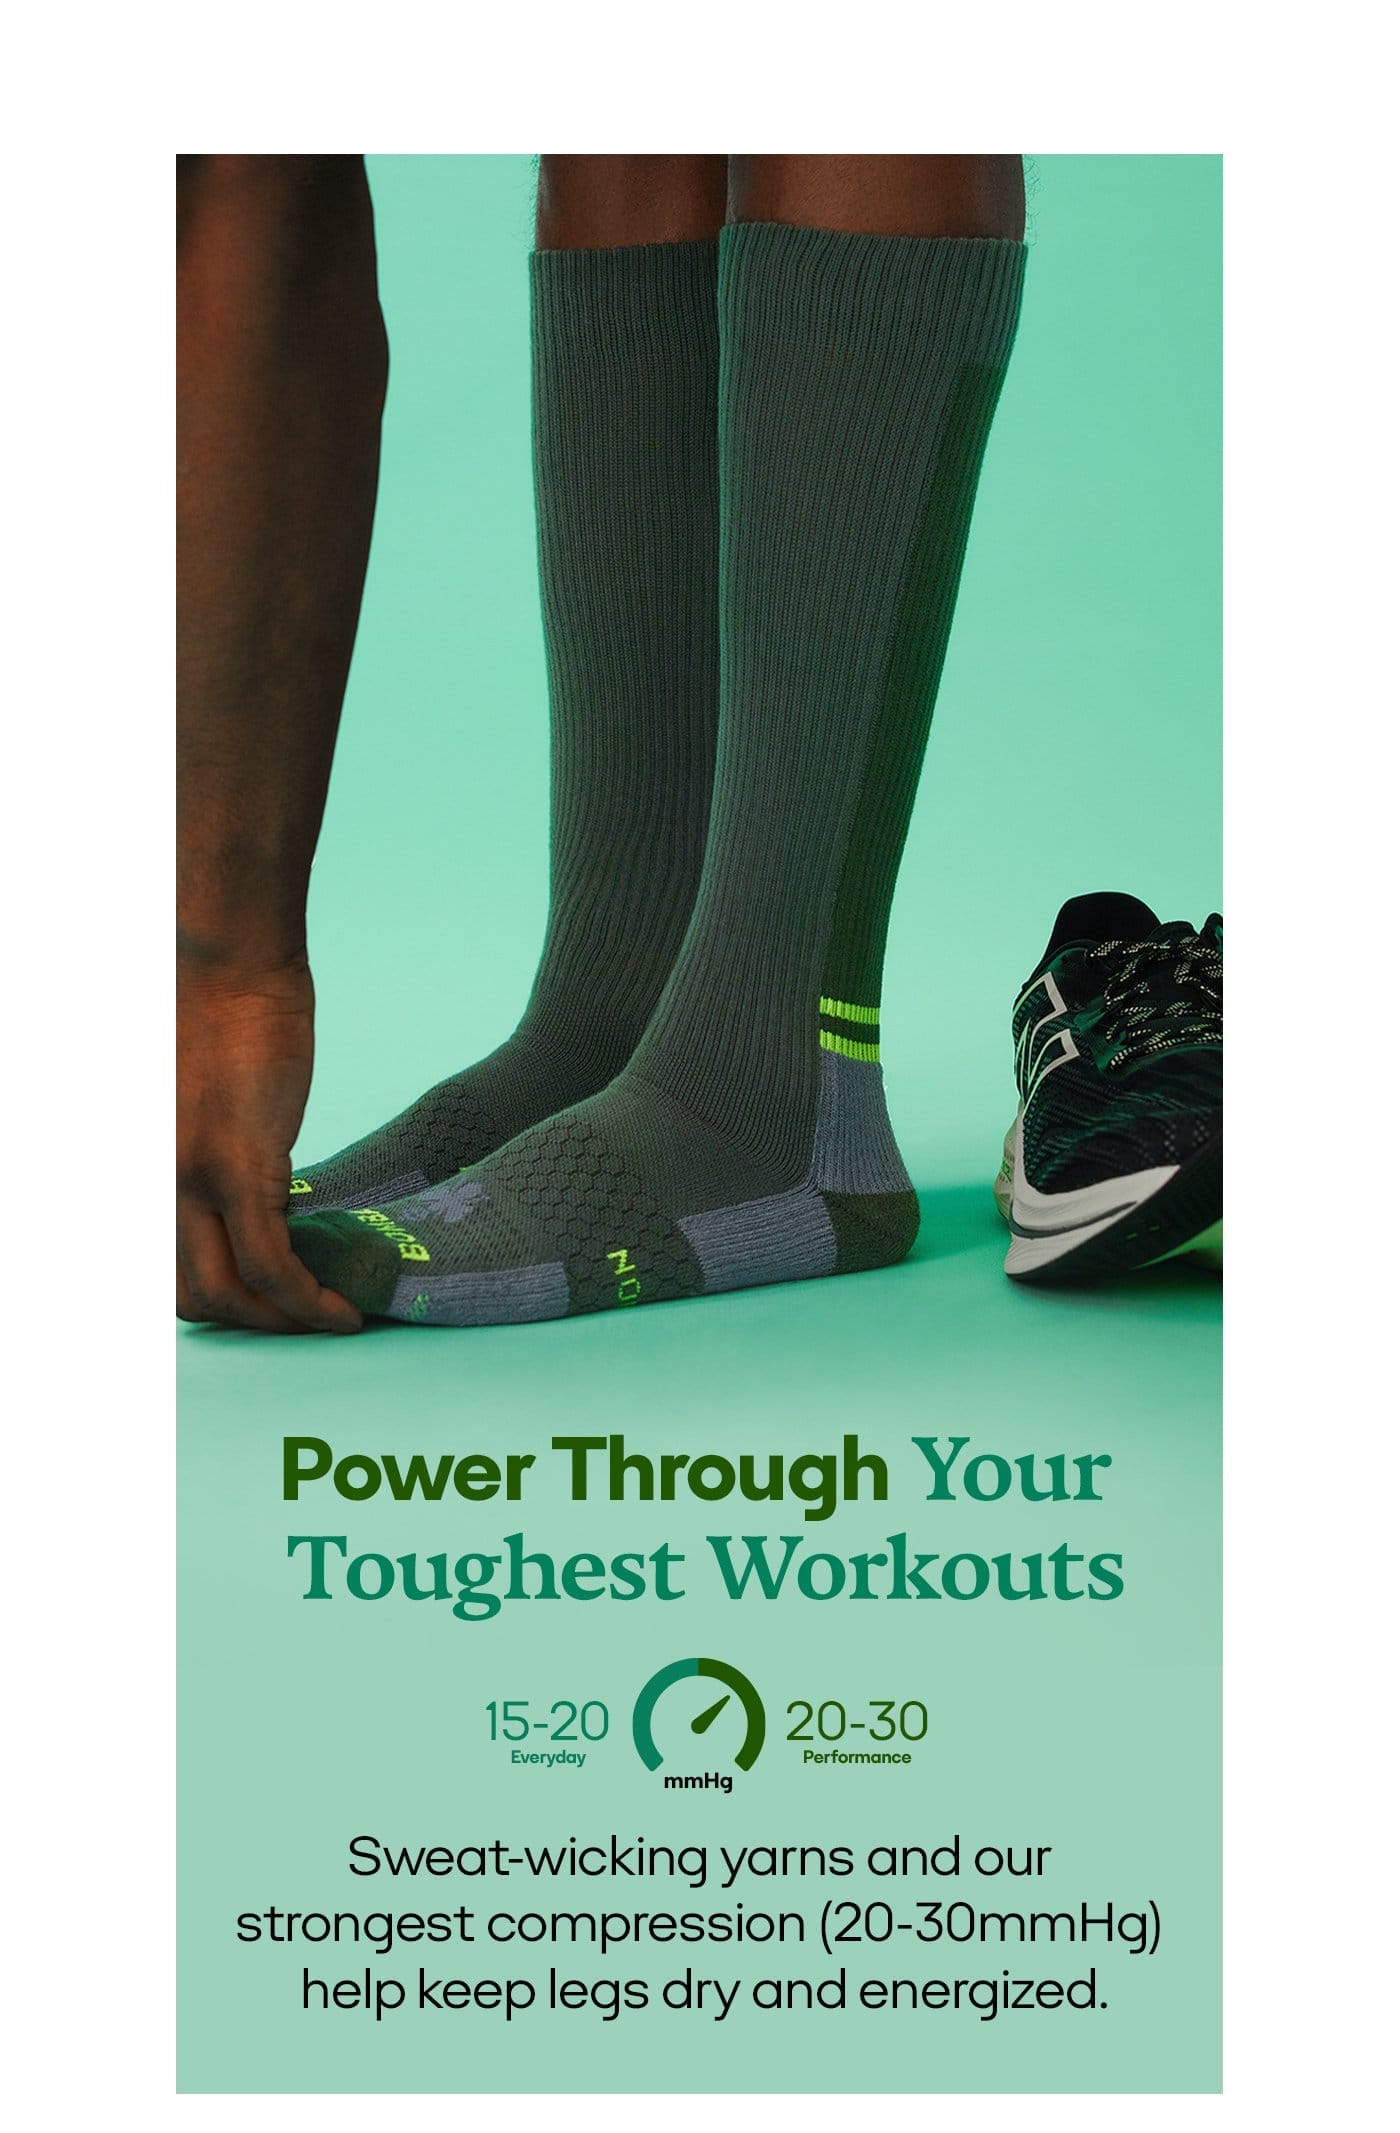 Power Through Your Toughest Workouts | 15-20 | mmHg | 20-30 | Sweat-wicking yarns and our strongest compression (20-30mmHg) help keep legs dry and energized.